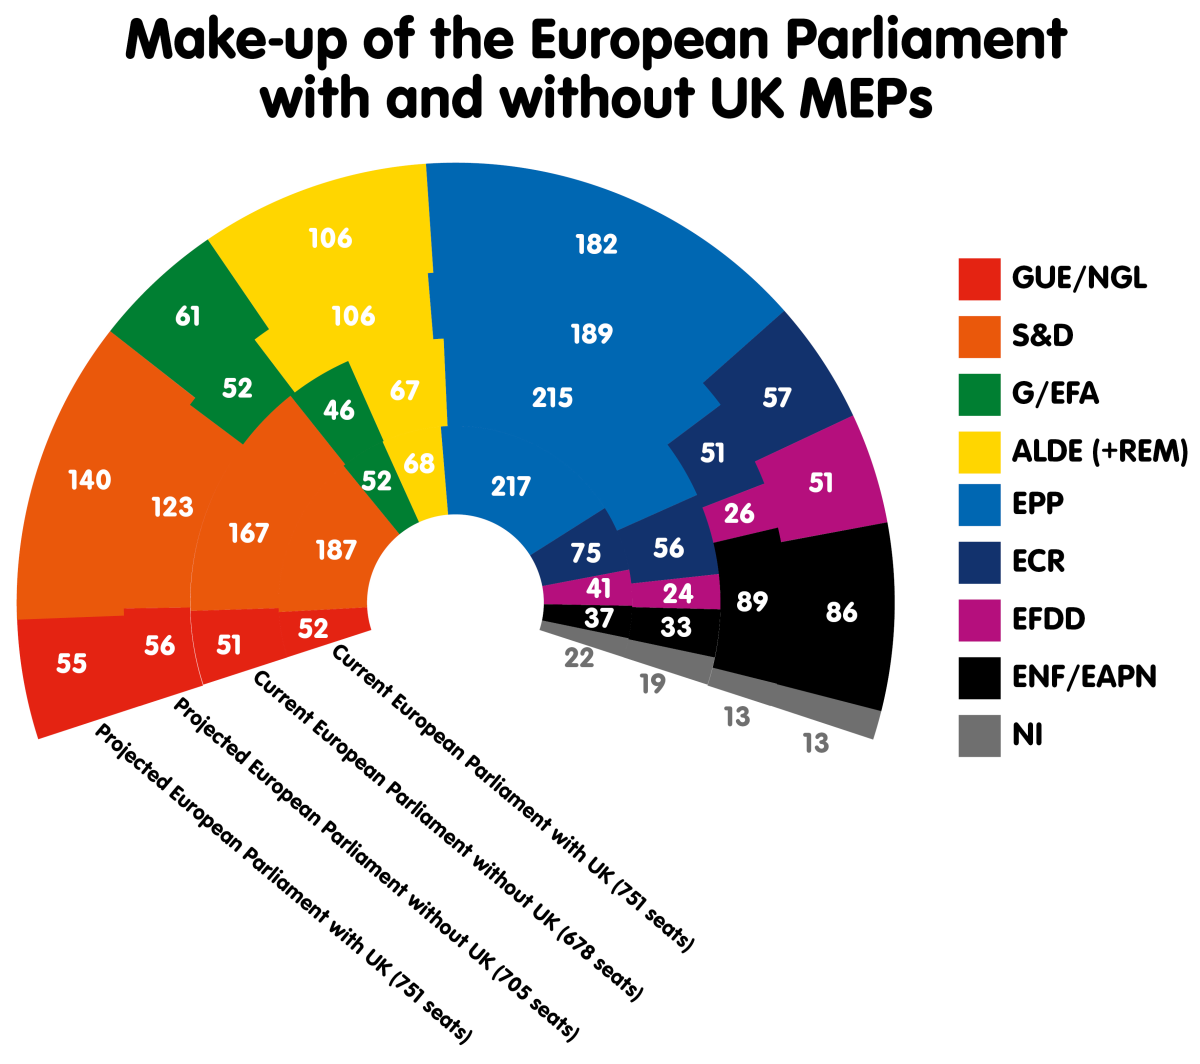 Make-up of the European Parliament with and without UK MEPs